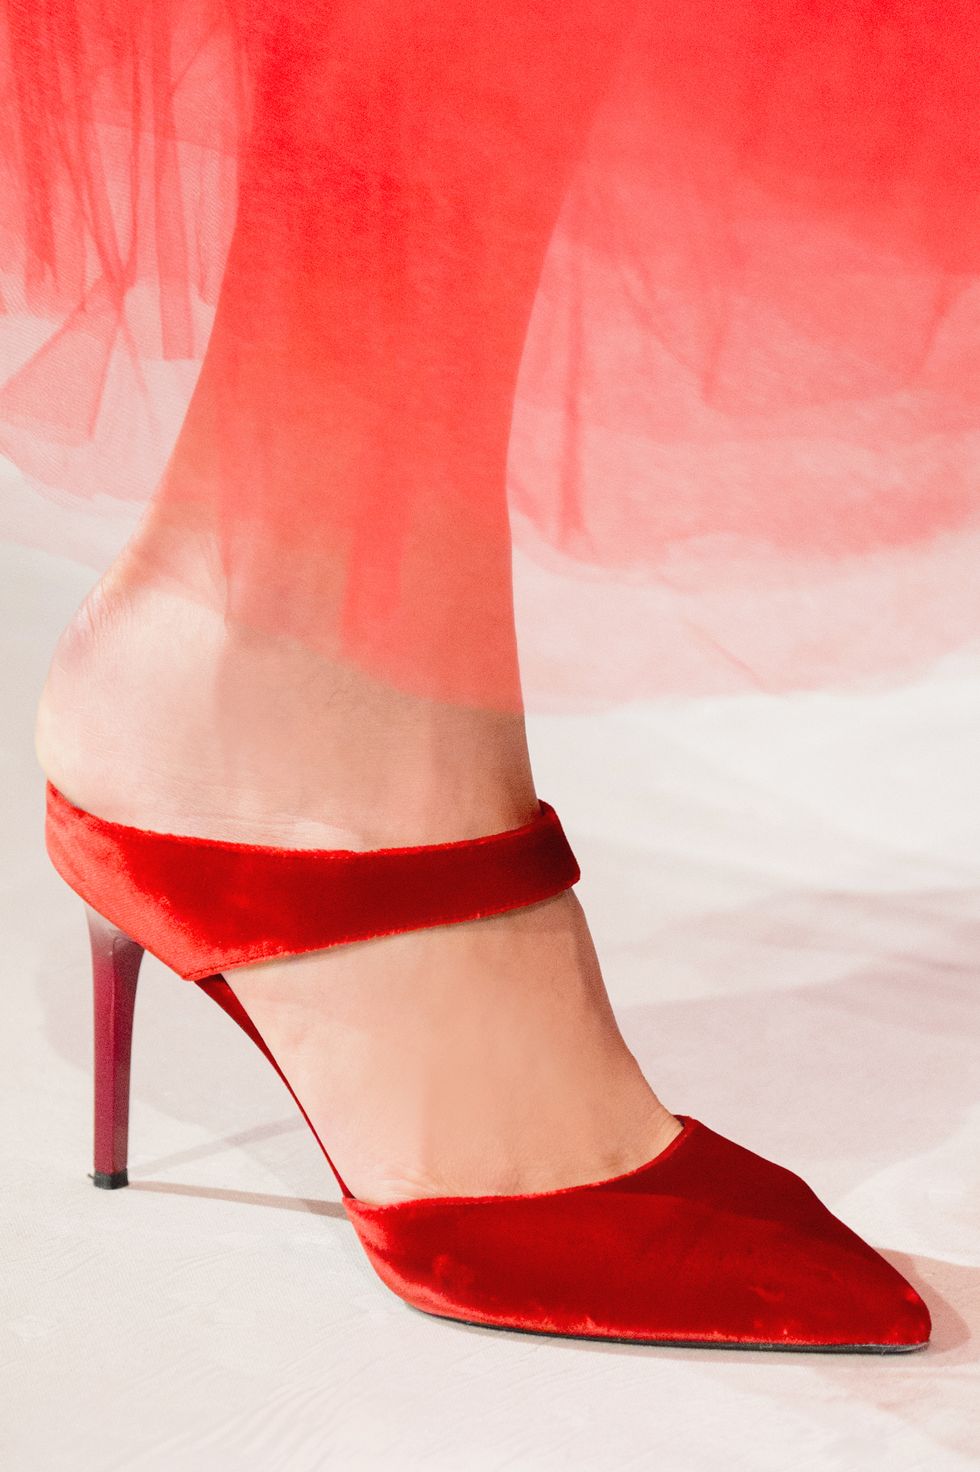 Footwear, Red, High heels, Shoe, Leg, Fashion, Human leg, Ankle, Joint, Haute couture, 